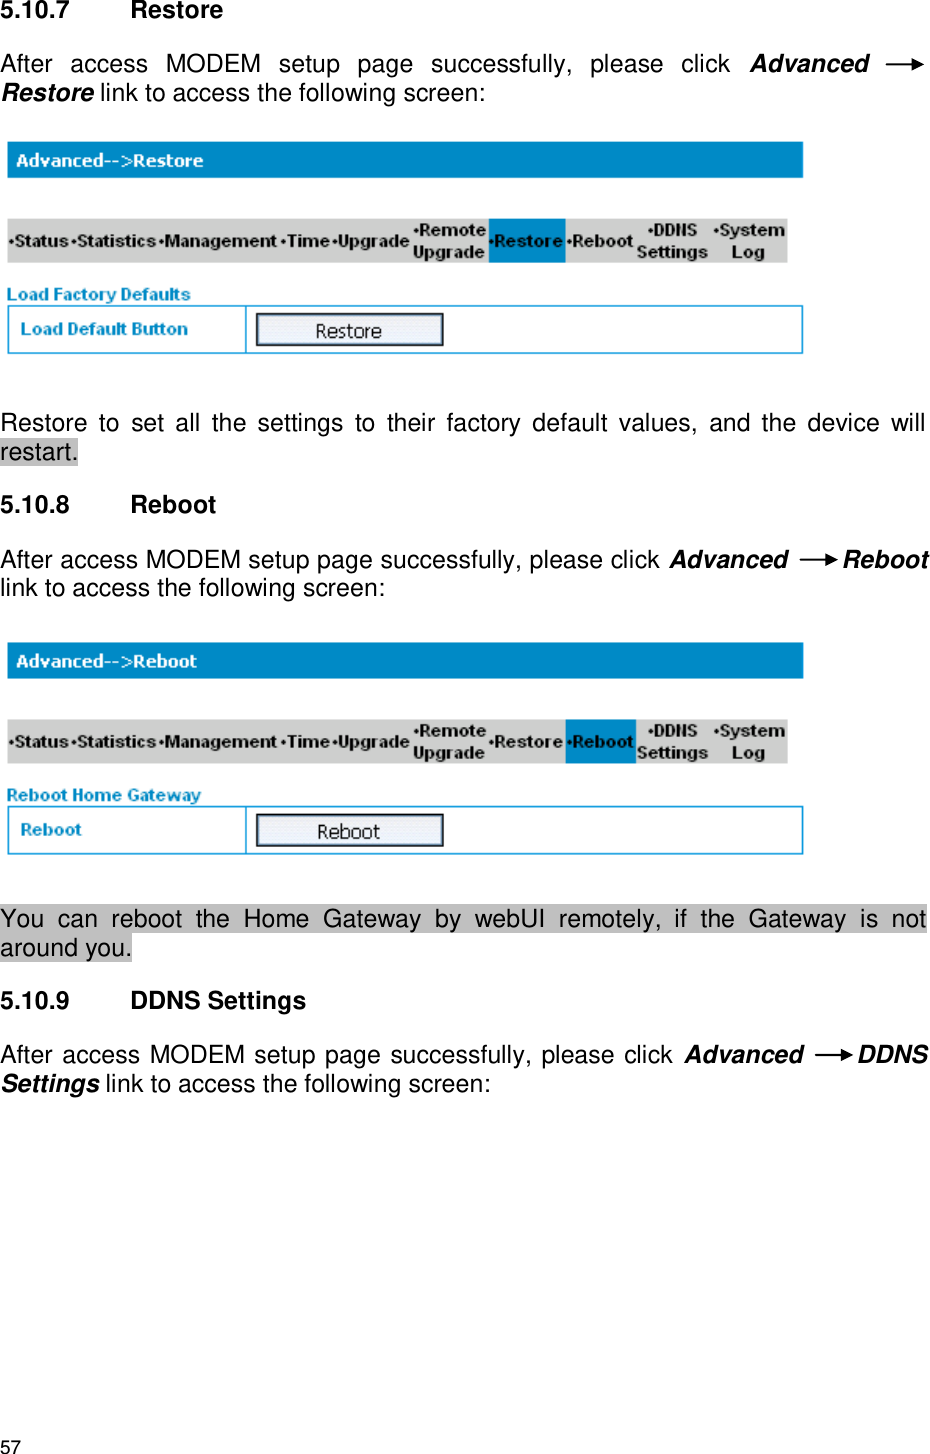 57 5.10.7  Restore After  access  MODEM  setup  page  successfully,  please  click  Advanced Restore link to access the following screen:  Restore  to  set  all  the  settings  to  their  factory  default  values,  and  the  device  will restart. 5.10.8  Reboot After access MODEM setup page successfully, please click Advanced  Reboot link to access the following screen:  You  can  reboot  the  Home  Gateway  by  webUI  remotely,  if  the  Gateway  is  not around you. 5.10.9  DDNS Settings After access MODEM setup page successfully, please click Advanced  DDNS Settings link to access the following screen: 